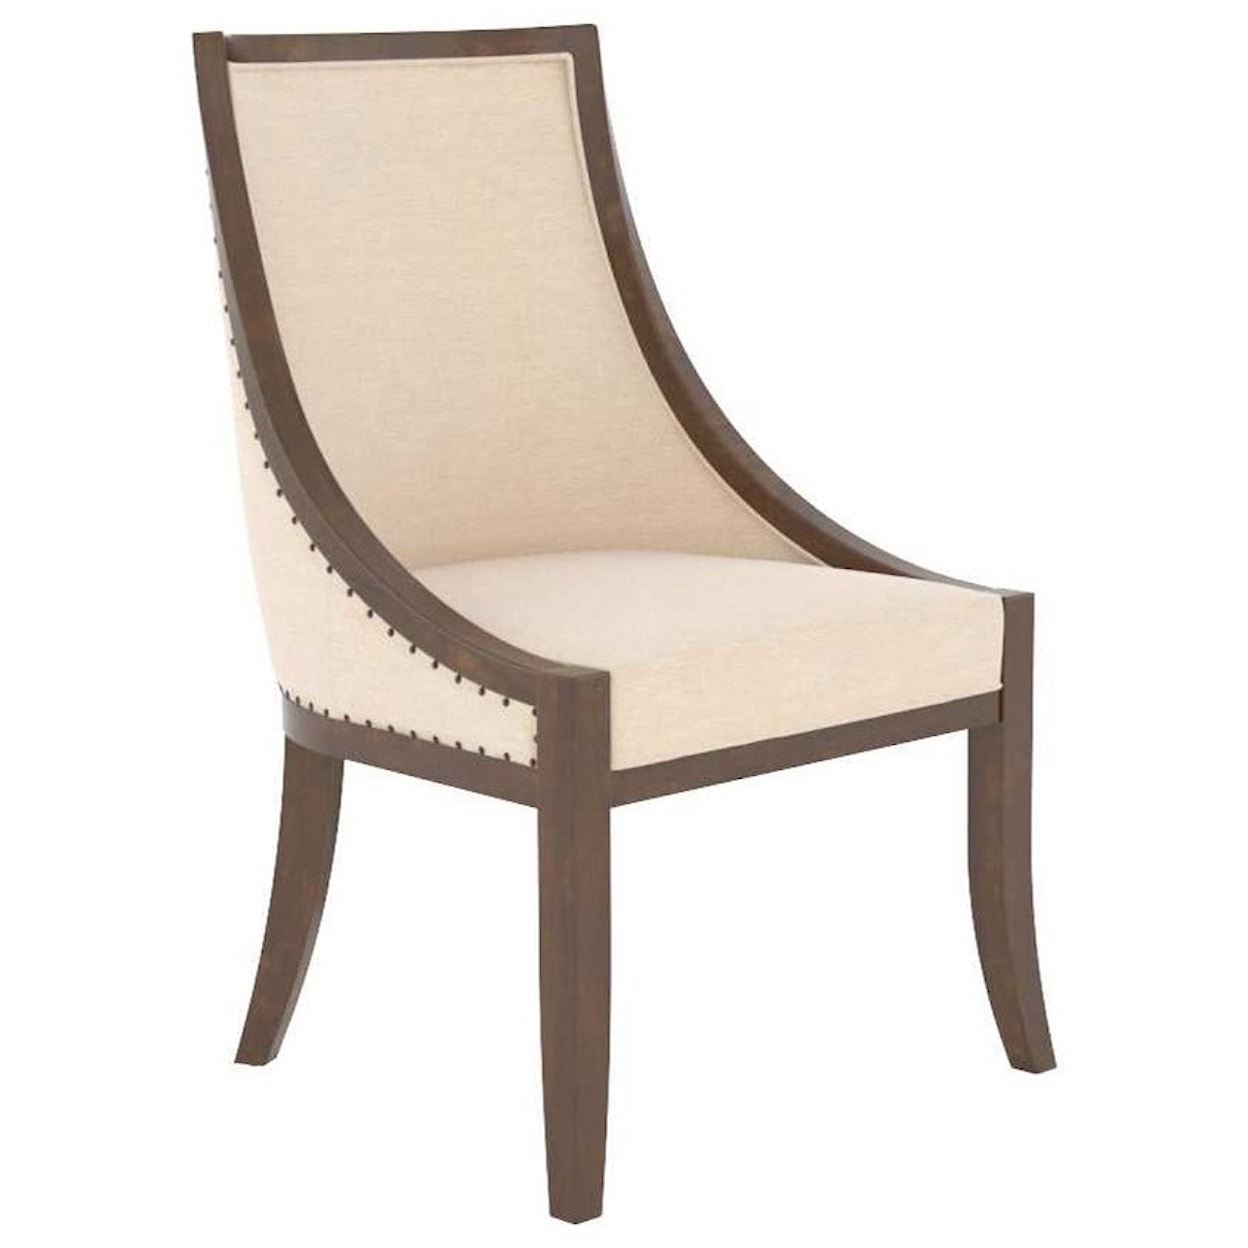 Canadel Classic Customizable Upholstered Chair